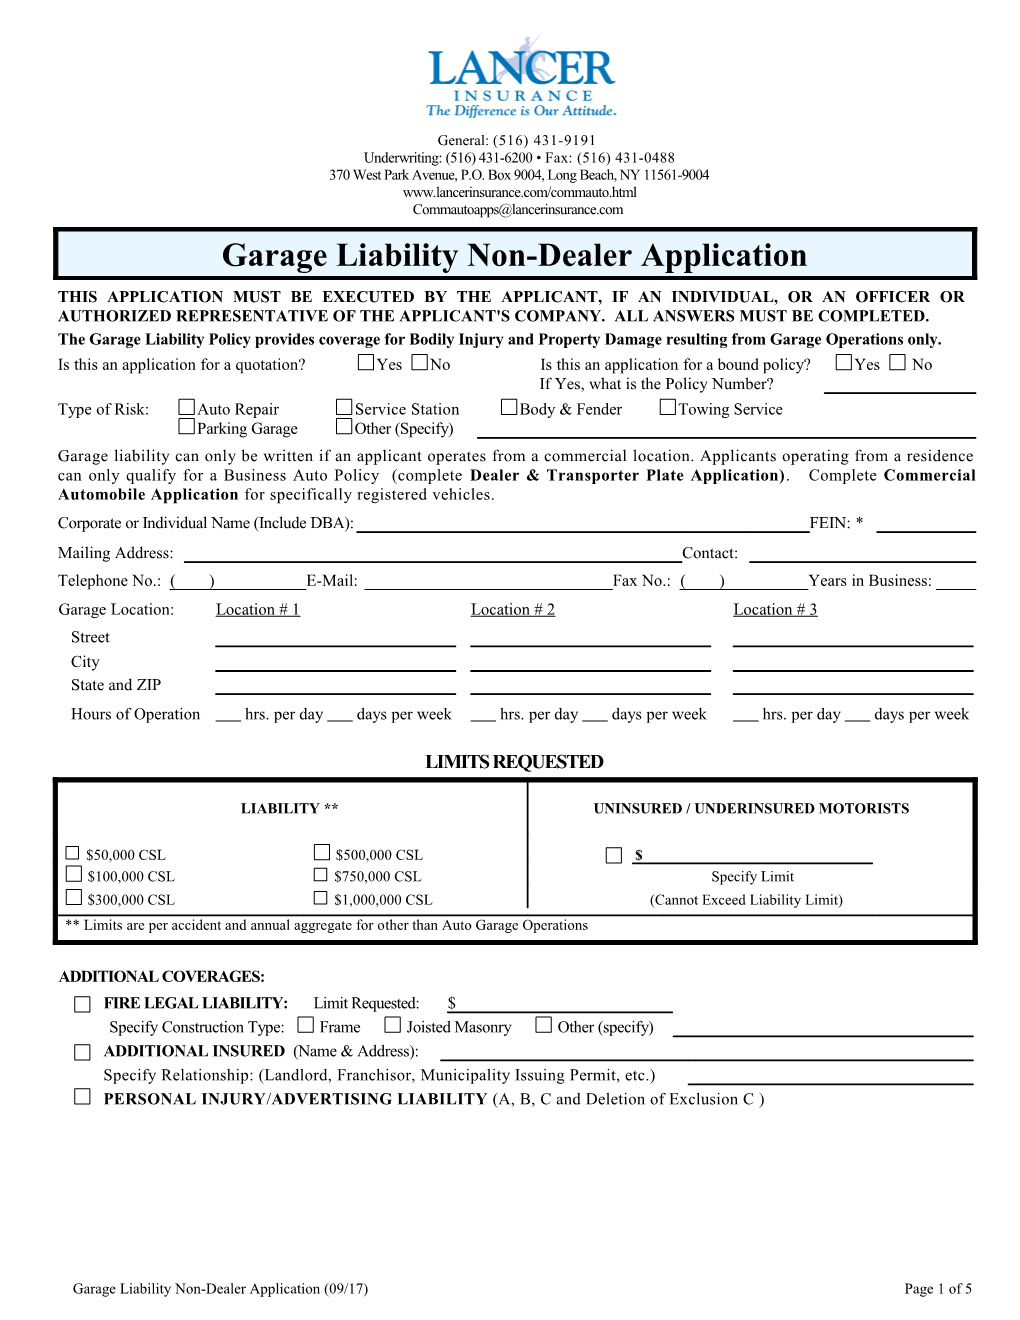 Garage Liability Non-Dealer Application (09/17)Page 1 of 5